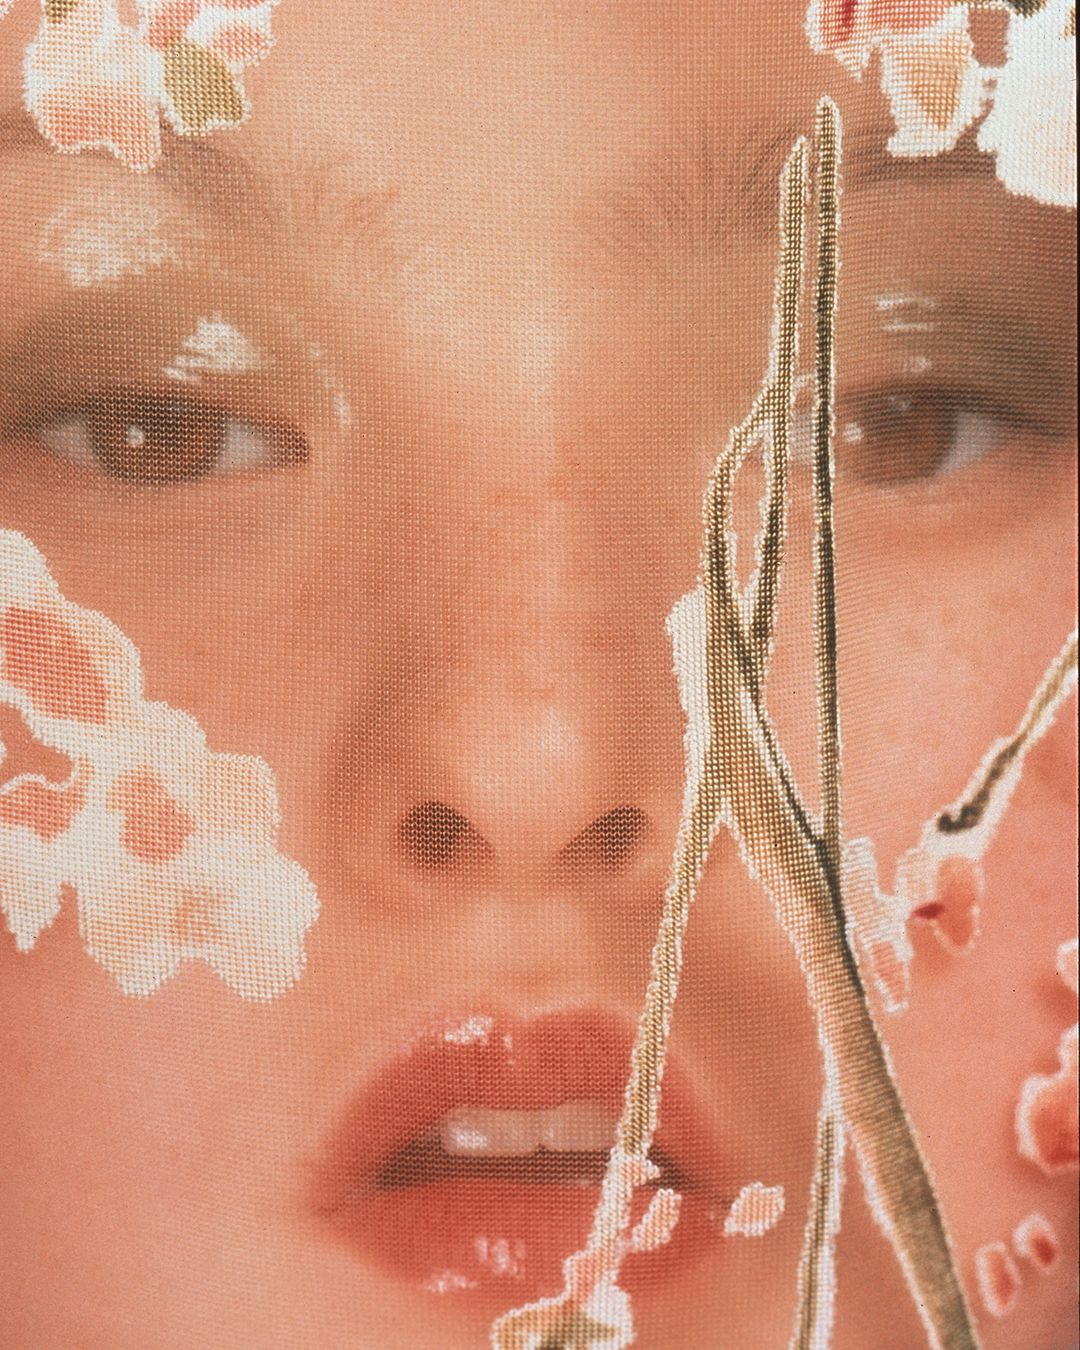 Close up of Devon Aoki's face partially obscured by mesh material with floral detailing